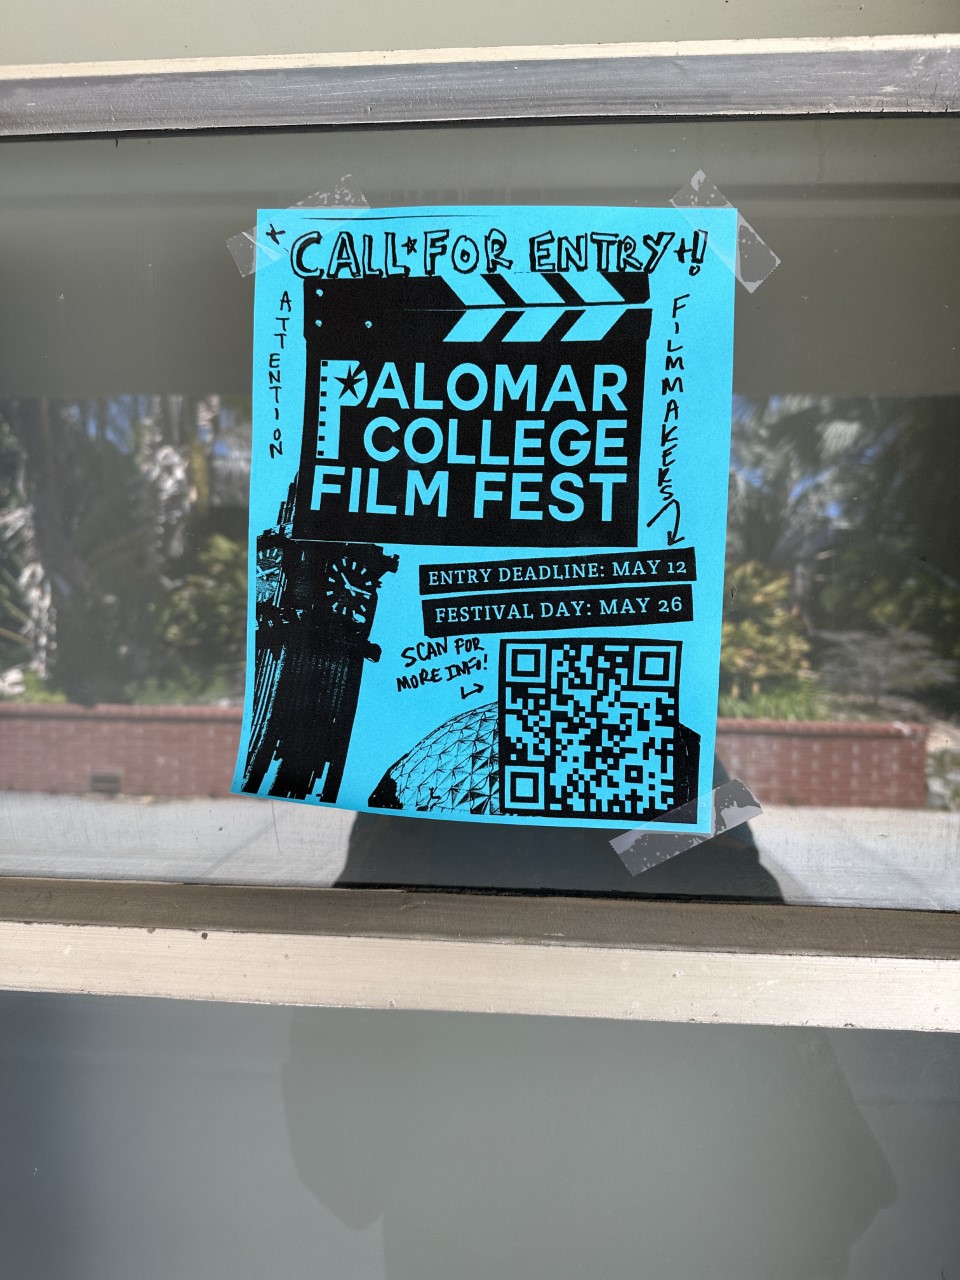 A teal-color paper flyer taped on a glass pane, promoting the 2023 Palomar College Film Fest on May 26 and encouraging students to submit their entry by May 12.